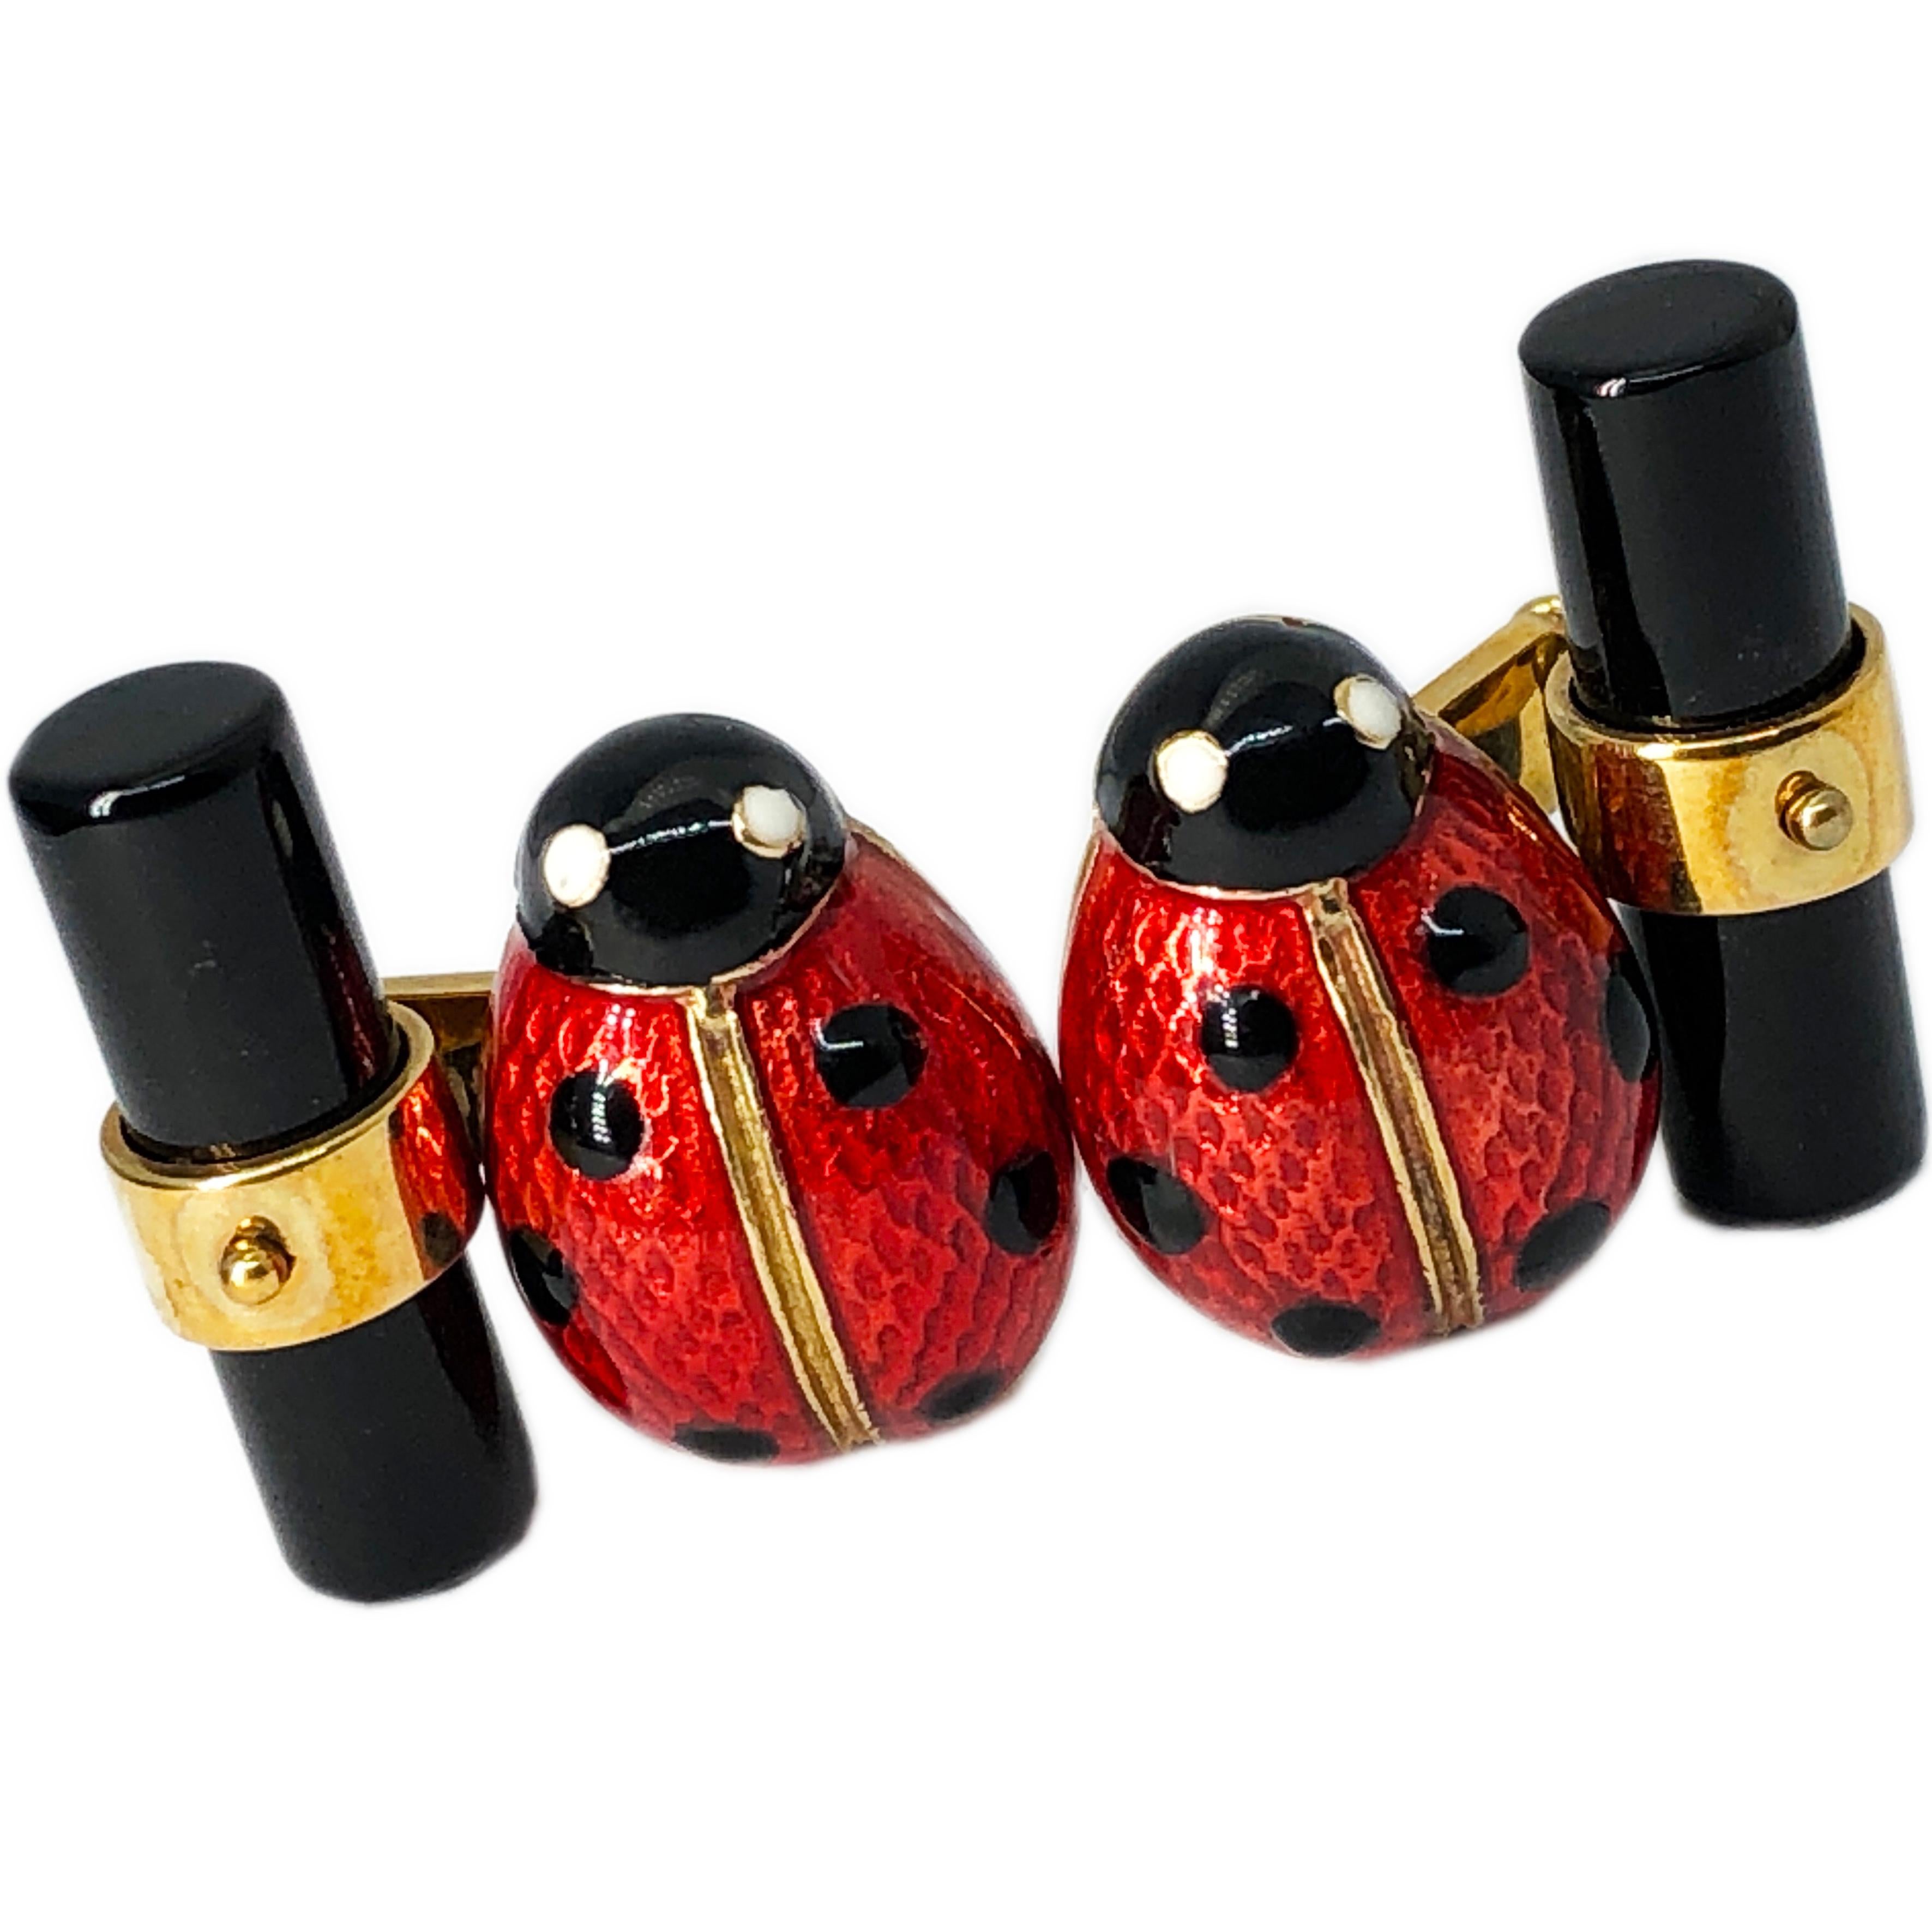 Chic Hand Enameled Little Ladybug Shaped Hand Inlaid Onyx Baton Back, Yellow Gold Setting Cufflinks.
In a smart Black Box and Pouch.